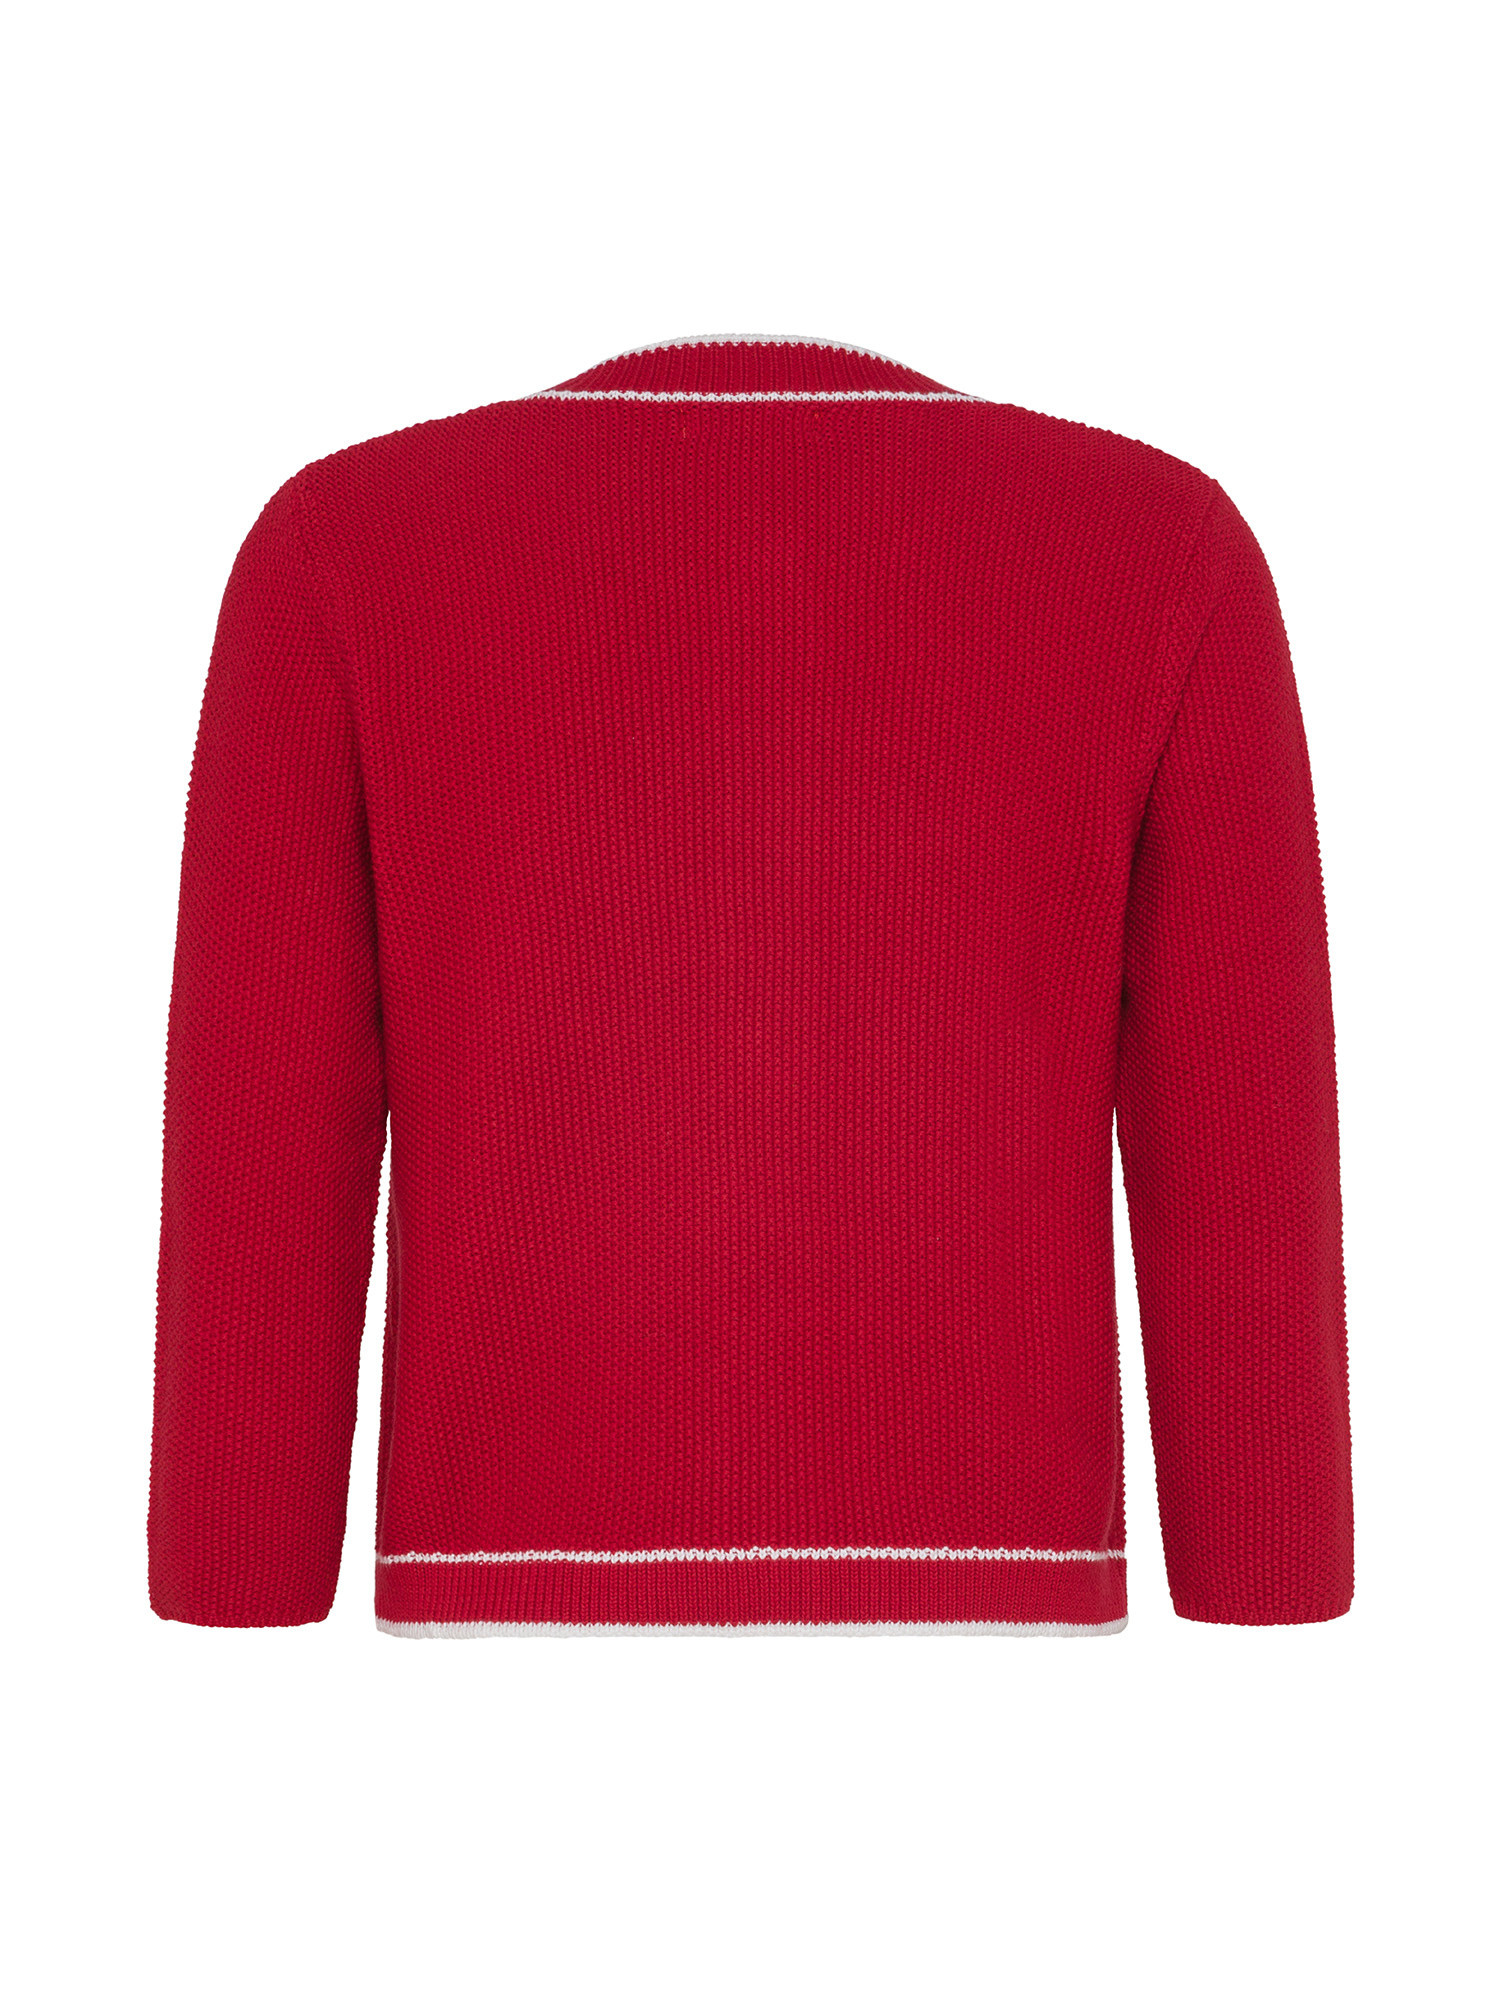 Koan - Short rice stitch cardigan in cotton, Red, large image number 1